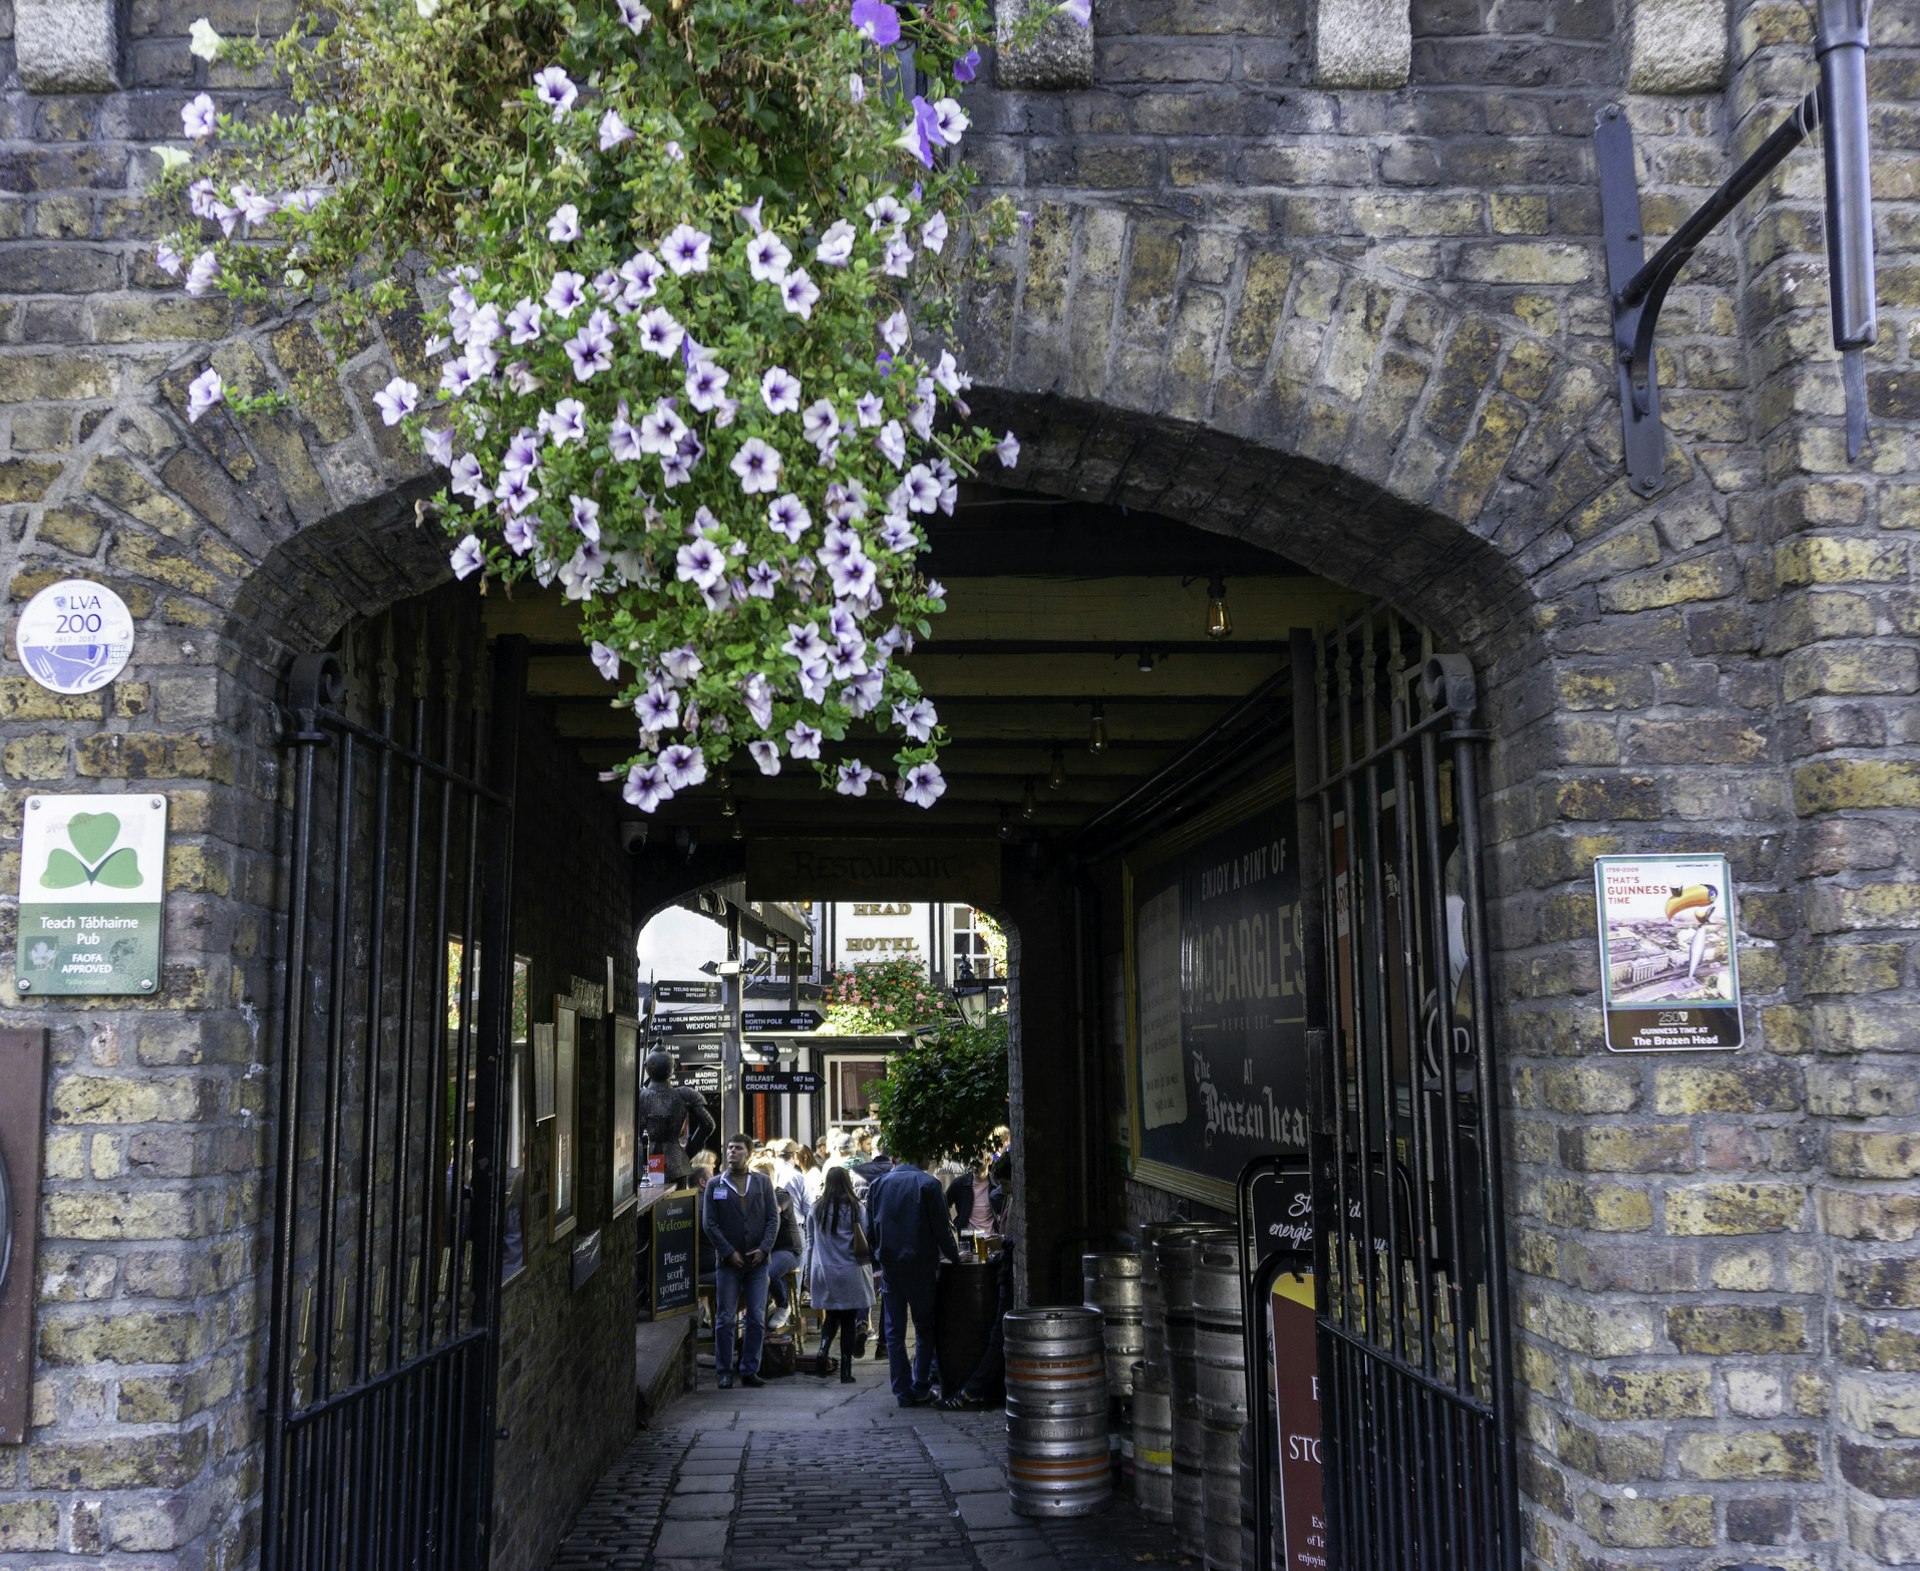 A shot through an arched stone doorway into the courtyard of a pub where people are gathered